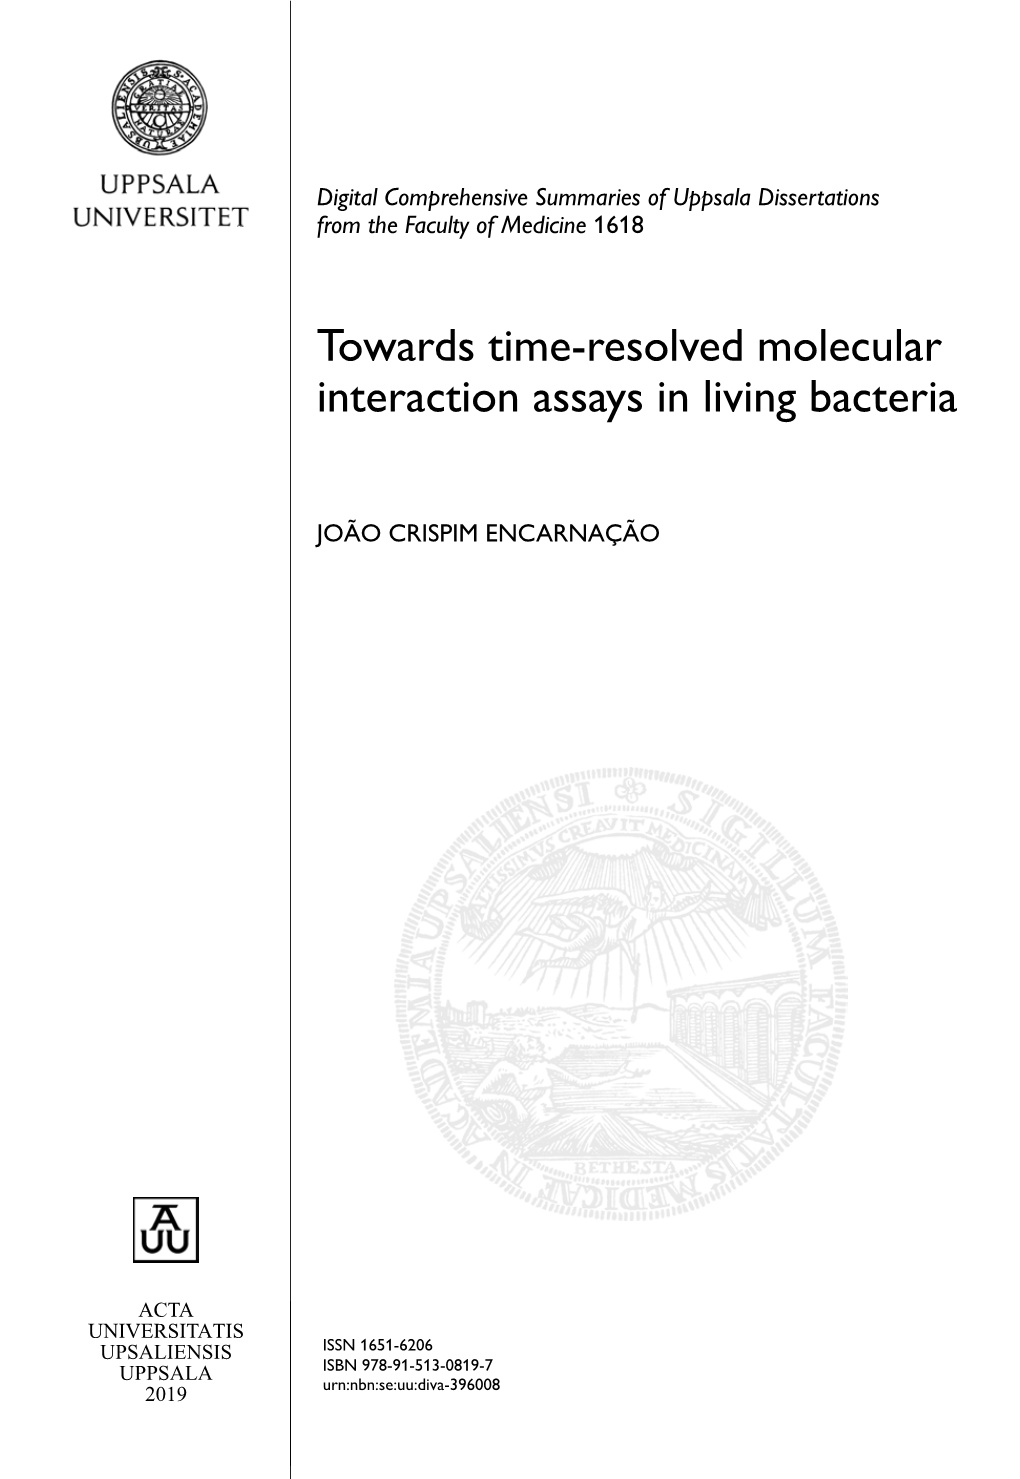 Towards Time-Resolved Molecular Interaction Assays in Living Bacteria